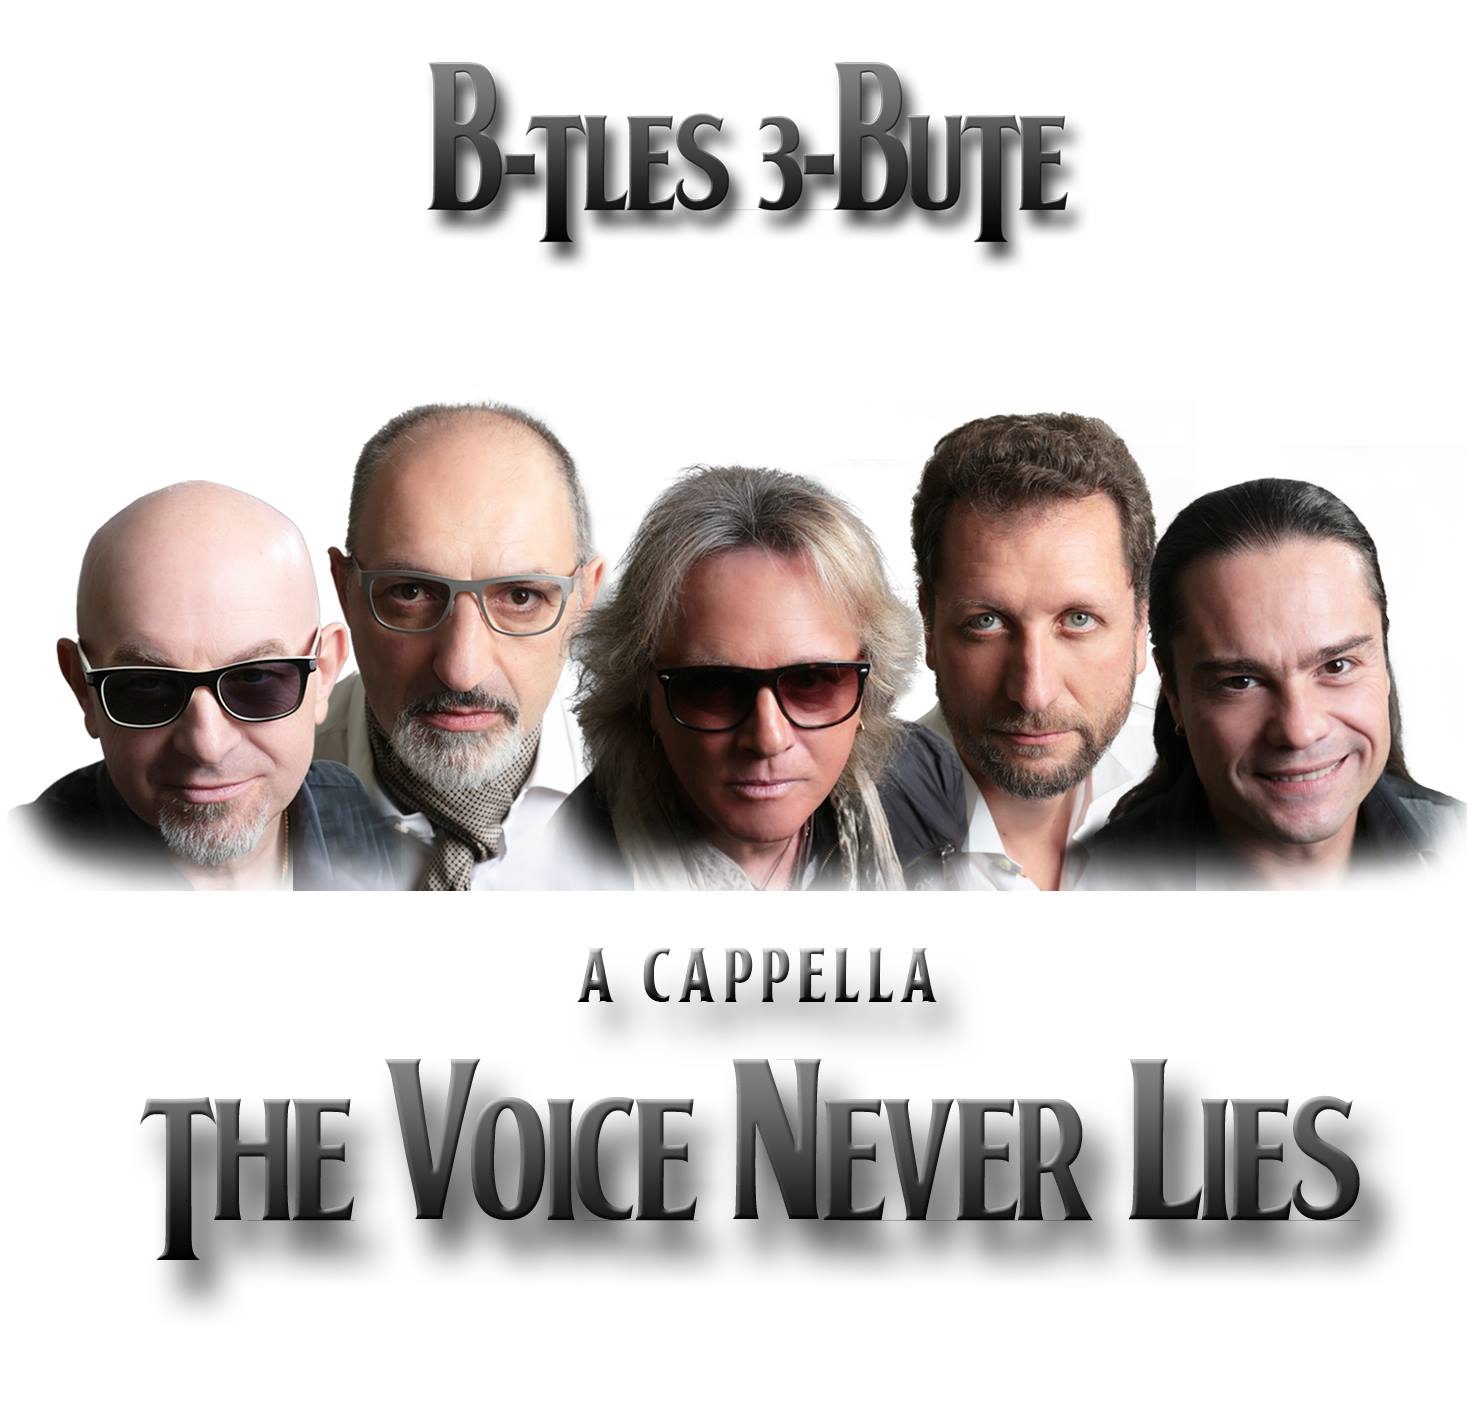 B-TLES 3-BUTE - THE VOICE NEVER LIES (A Cappella)  CD